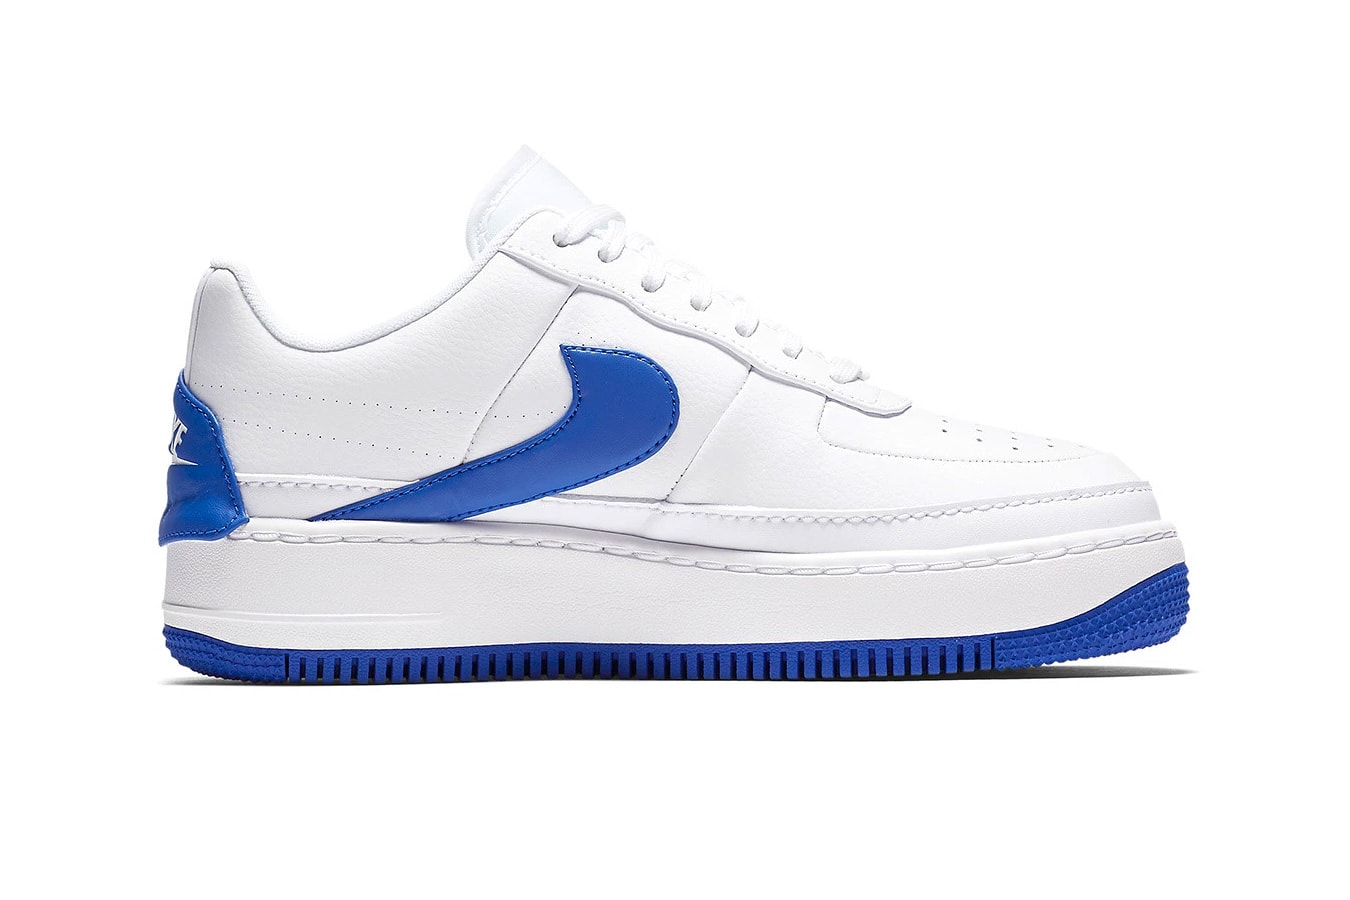 Nike Air Force 1 low Jester royal white sneaker deconstructed the 1s reimagined leather blue footwear sneakers release